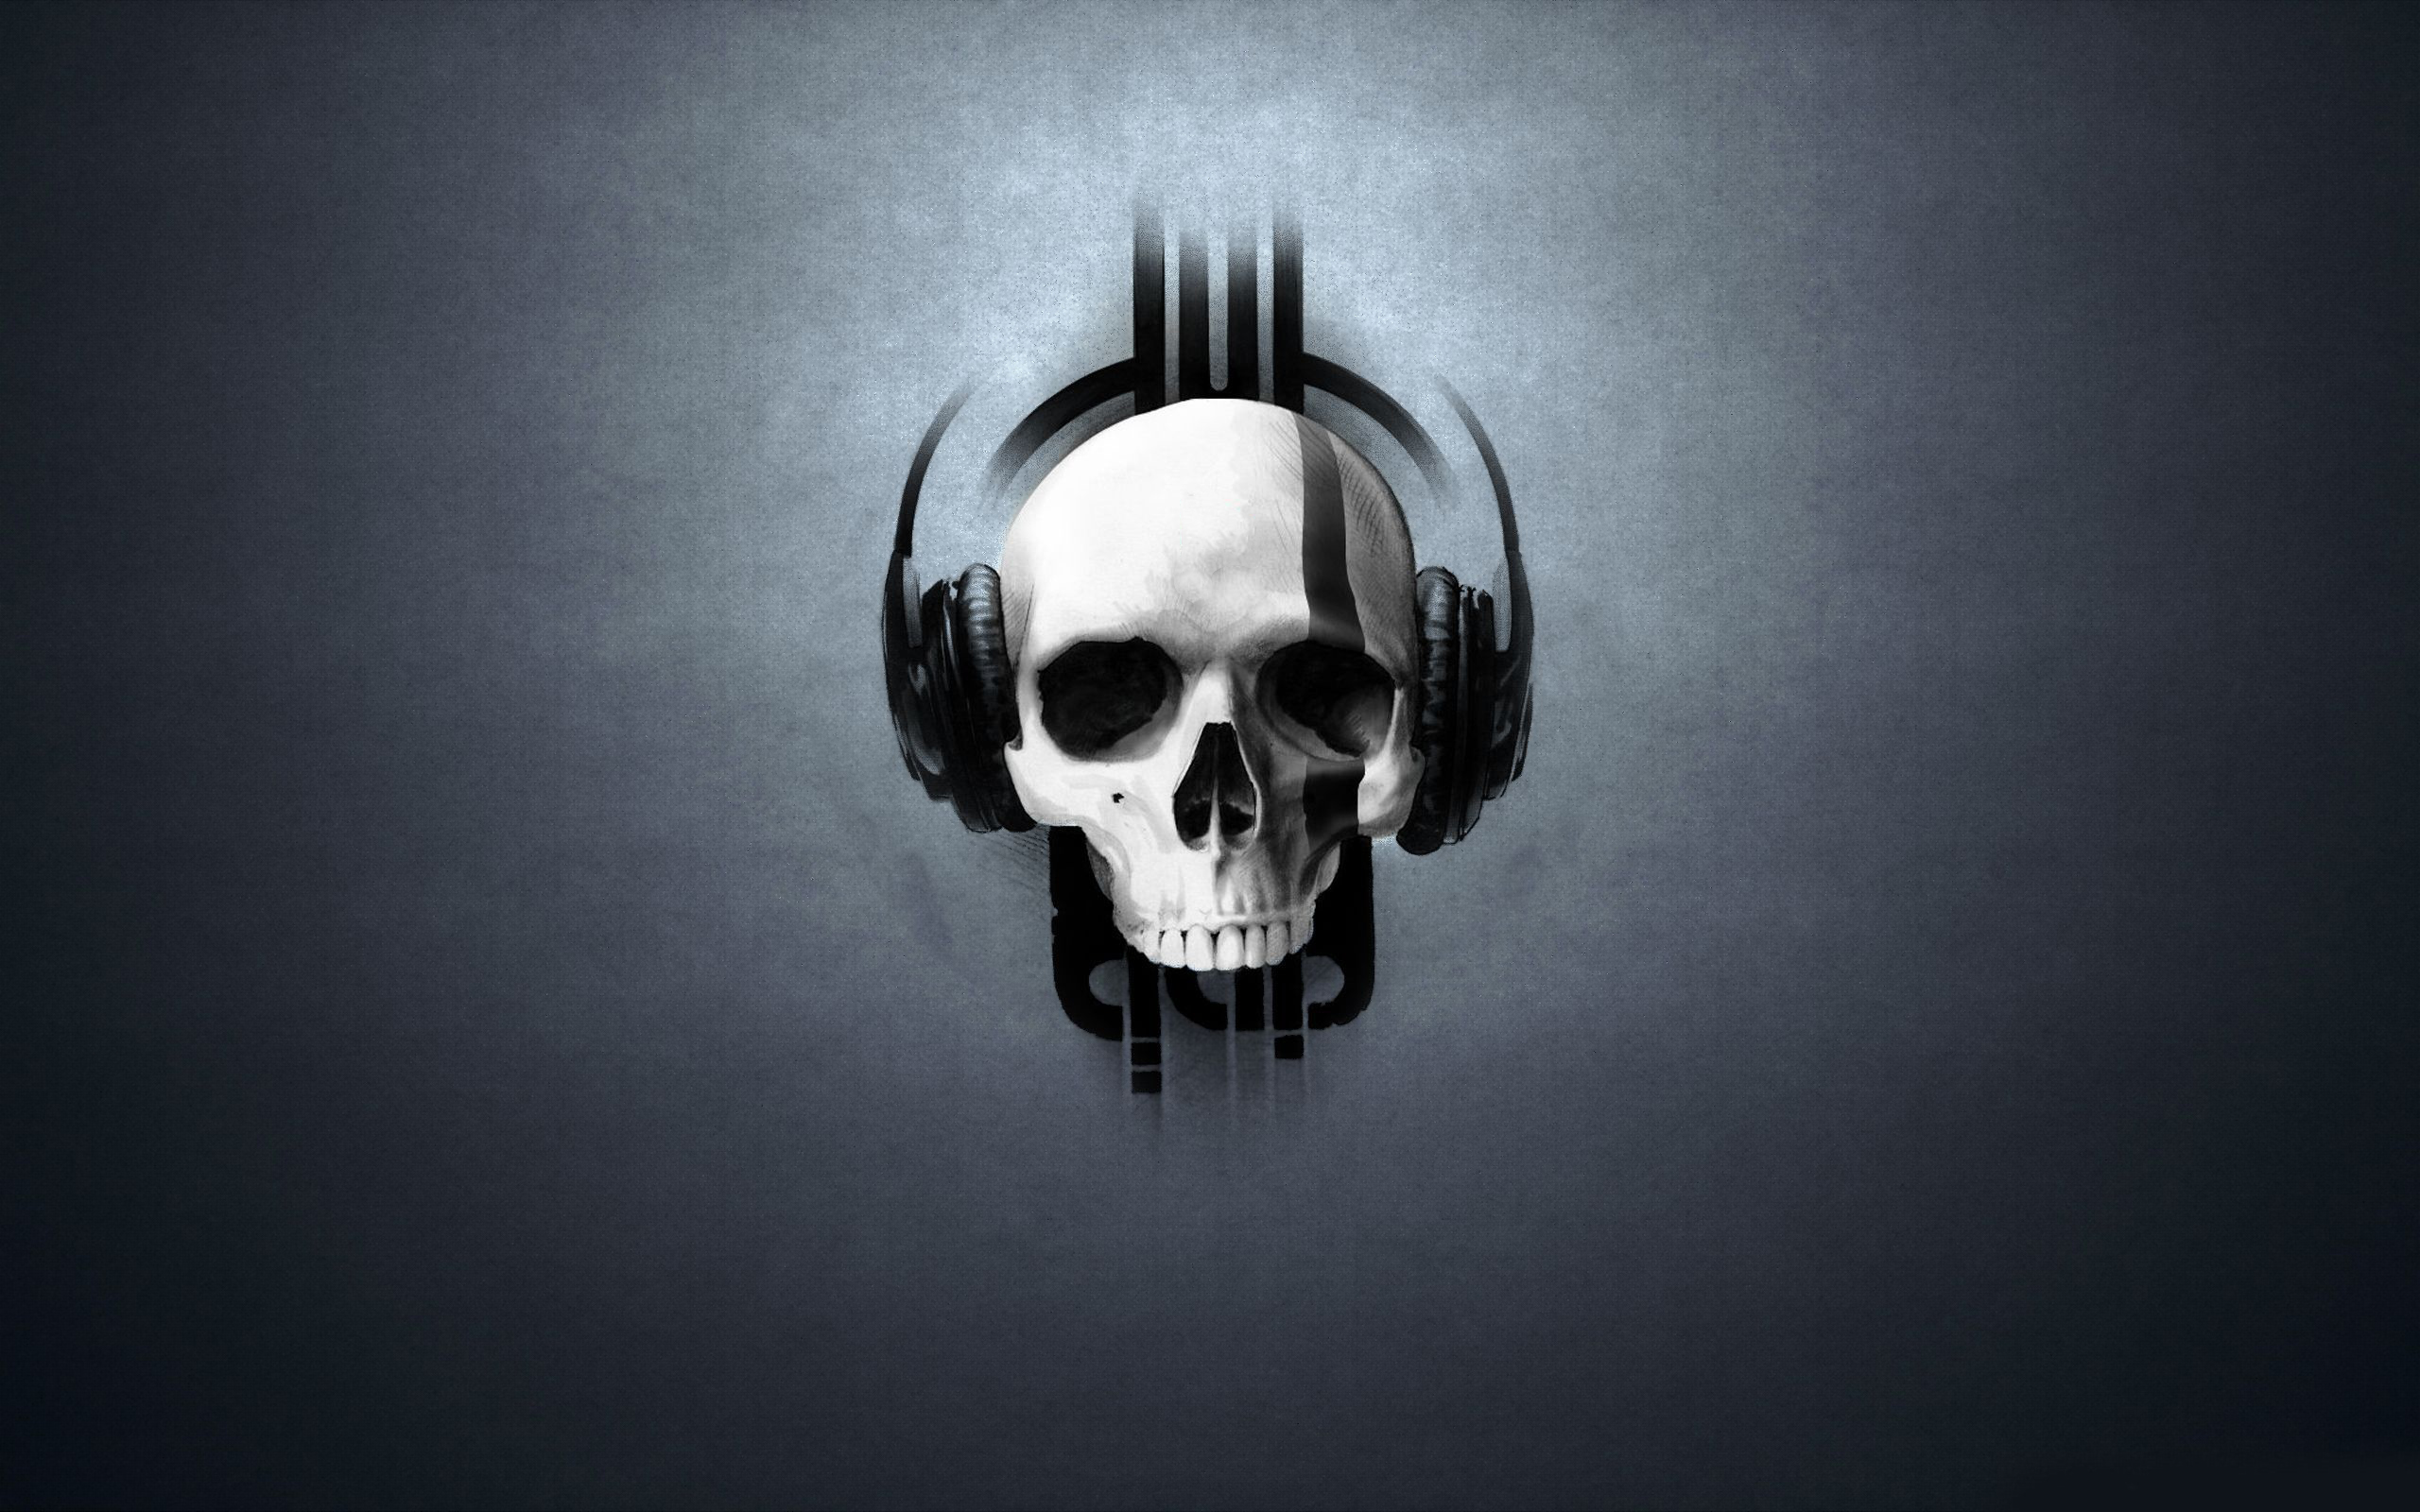 Cool Background Of Skulls With Guns Image Amp Pictures Becuo